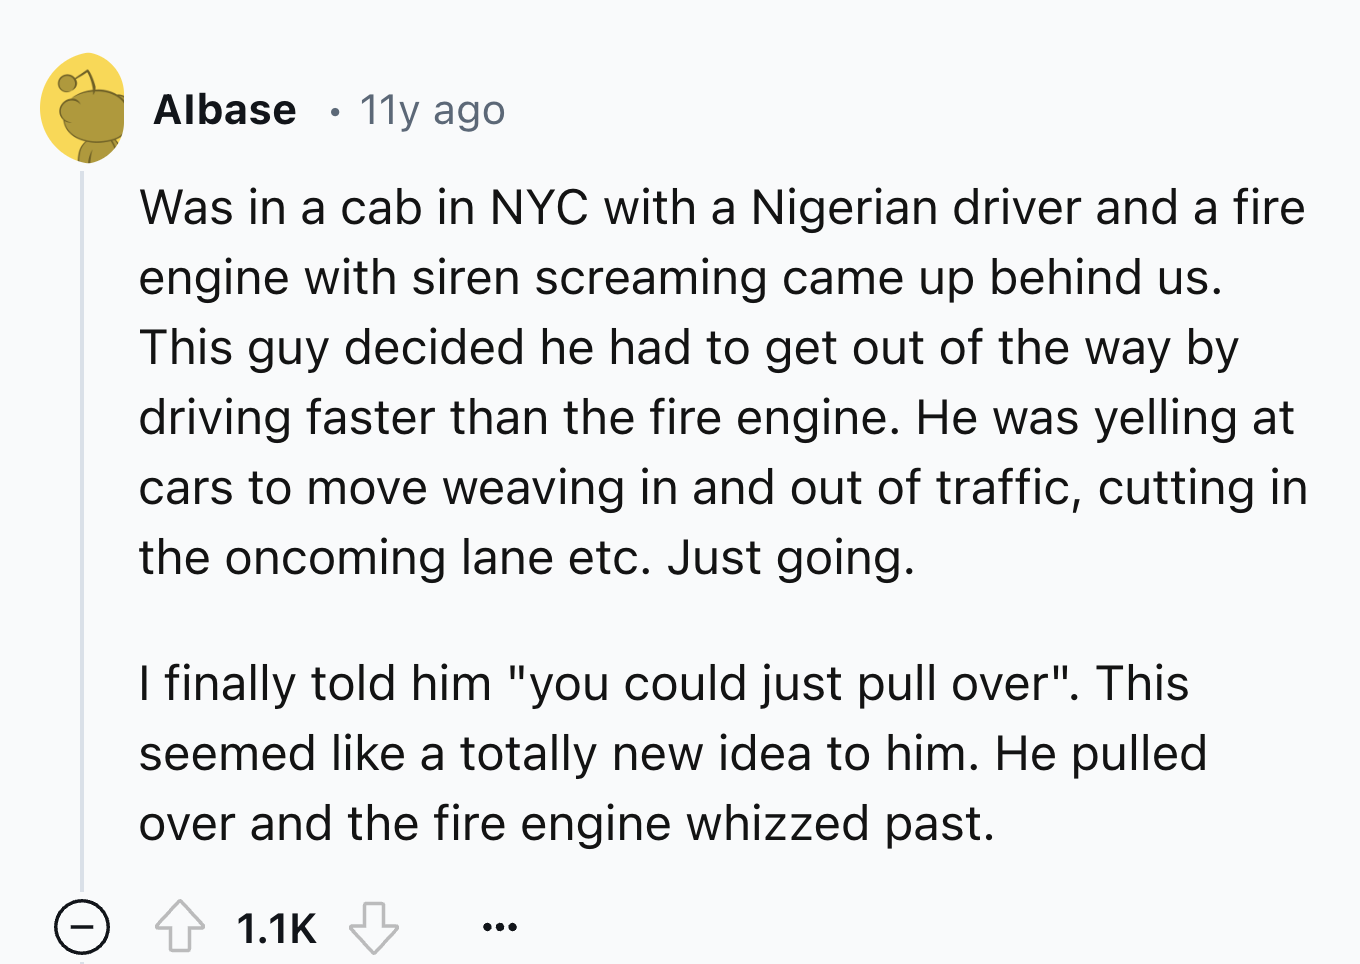 number - Albase 11y ago Was in a cab in Nyc with a Nigerian driver and a fire engine with siren screaming came up behind us. This guy decided he had to get out of the way by driving faster than the fire engine. He was yelling at cars to move weaving in an